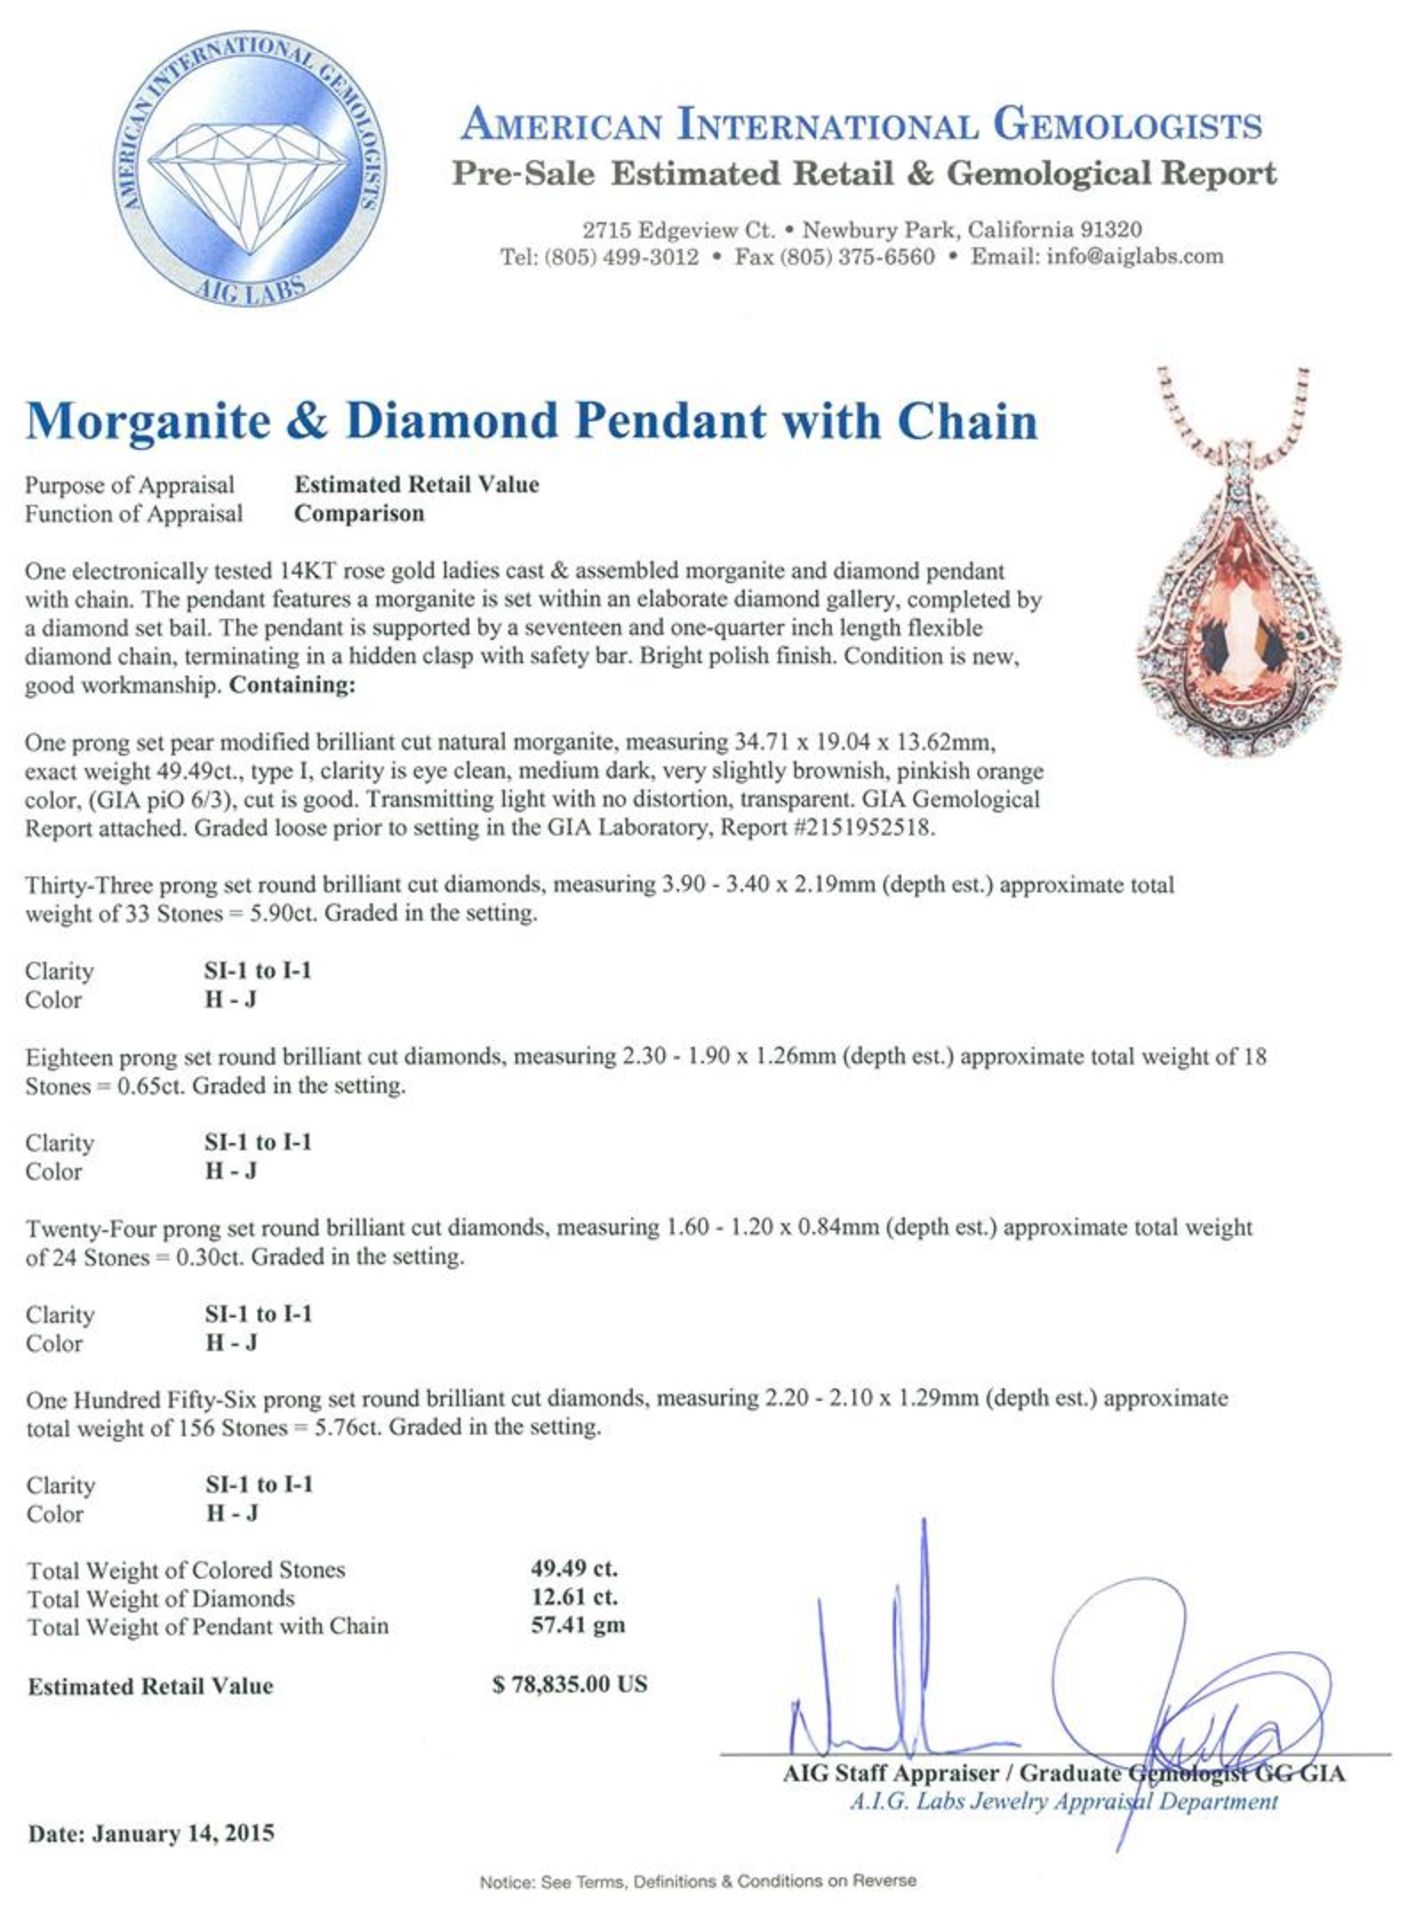 14KT Rose Gold GIA Certified 49.49ct Morganite and Diamond Pendant With Chain - Image 3 of 4